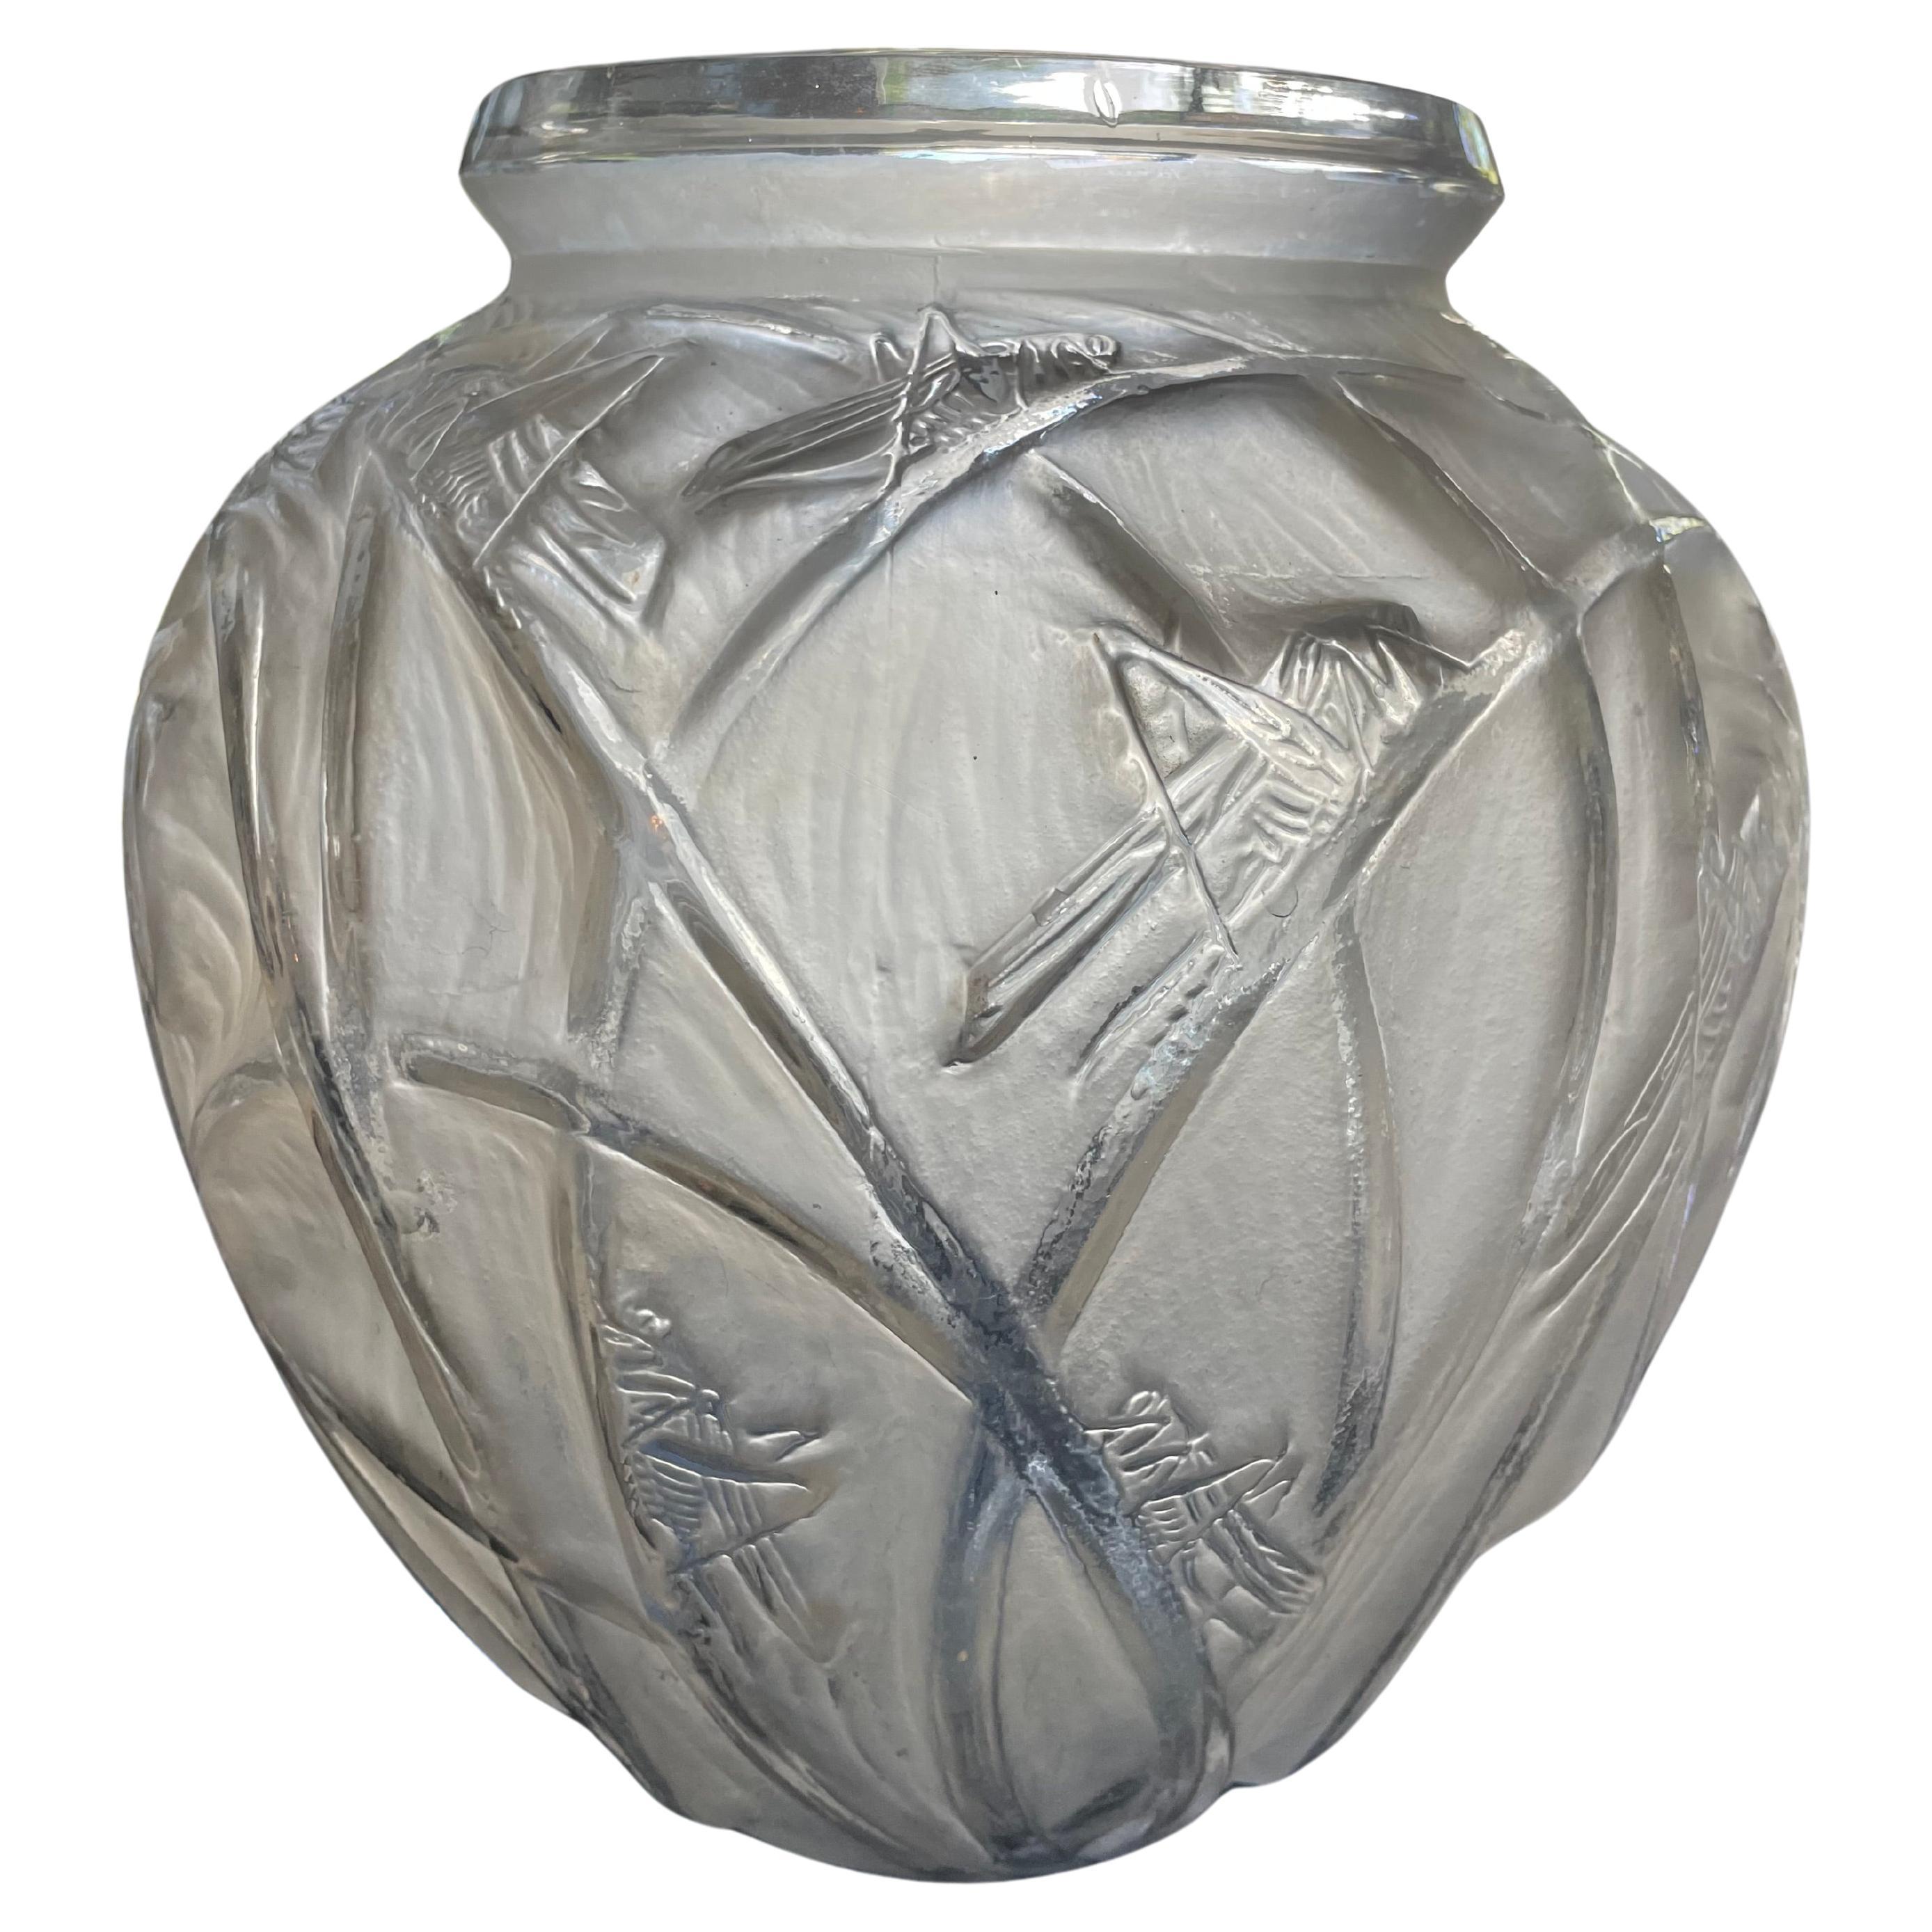 "Sauterelles" Vase by Rene Lalique from the Linda Ronstadt Collection For Sale